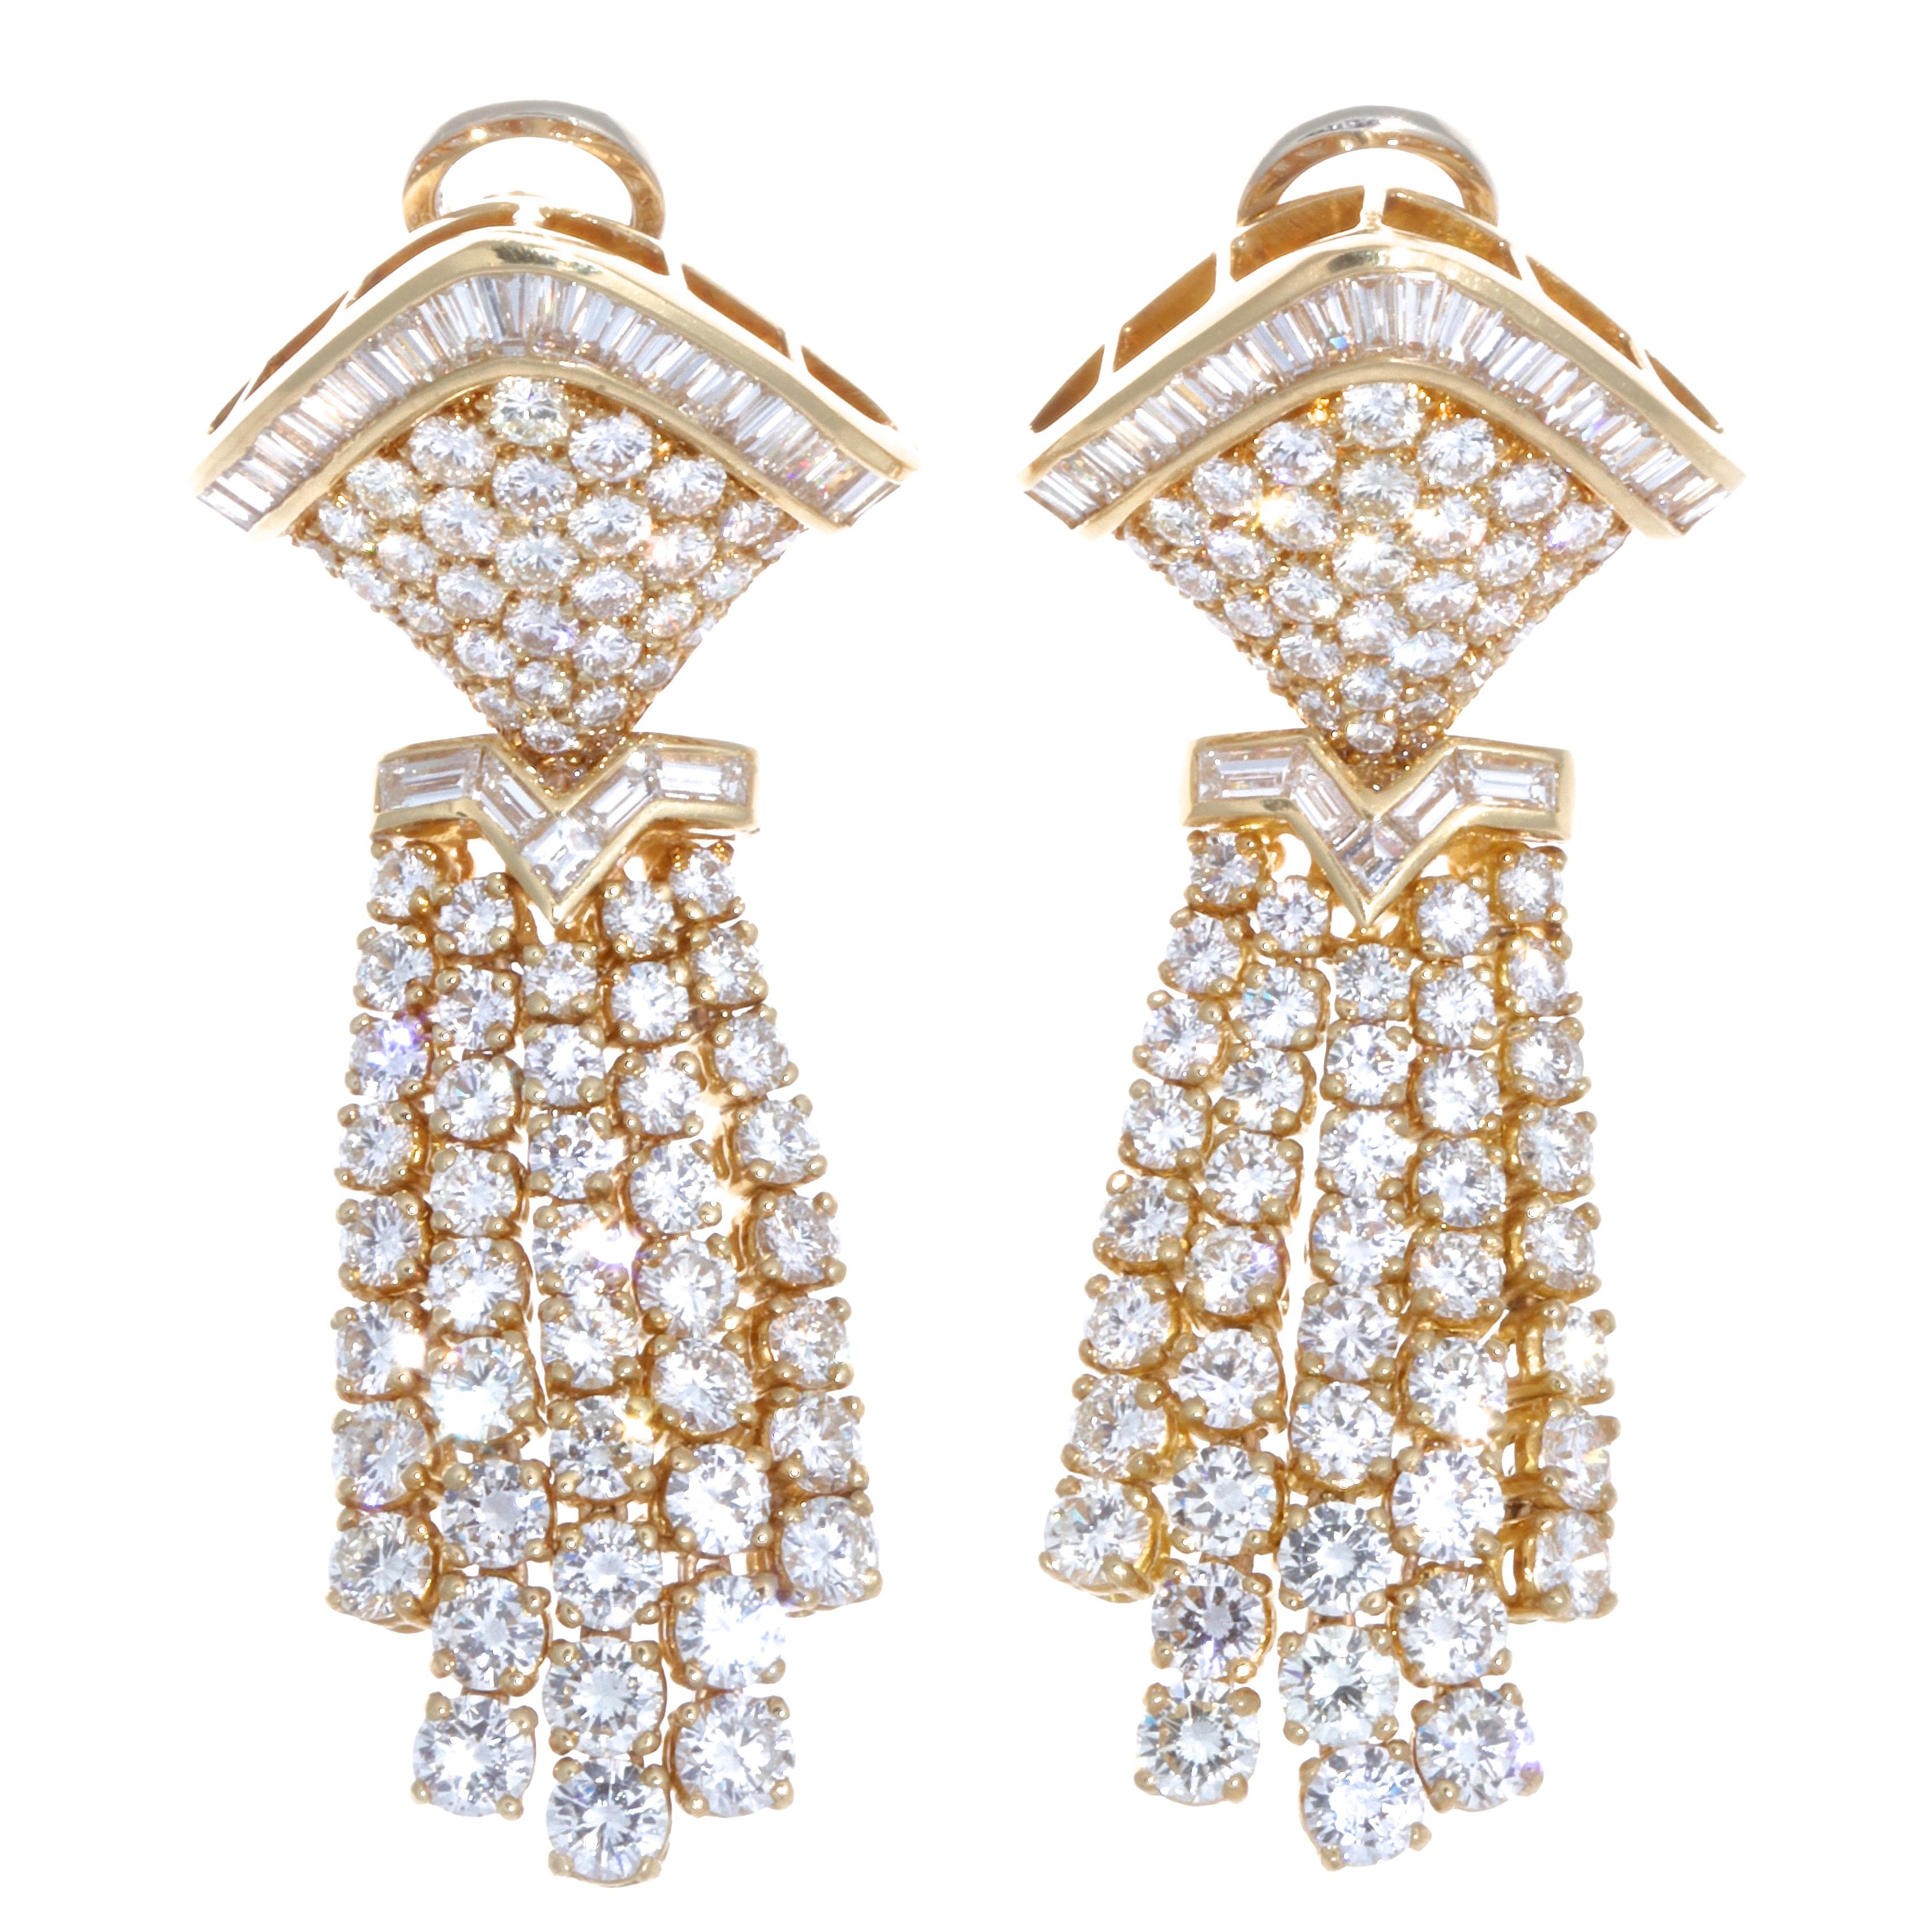 A truly 1980's classic. These vintage diamond 18k gold chandelier earrings will draw all the attention towards you. An accessory that elevates their owner and attracts attention all around. The earrings feature approximately 13.50 carats of round